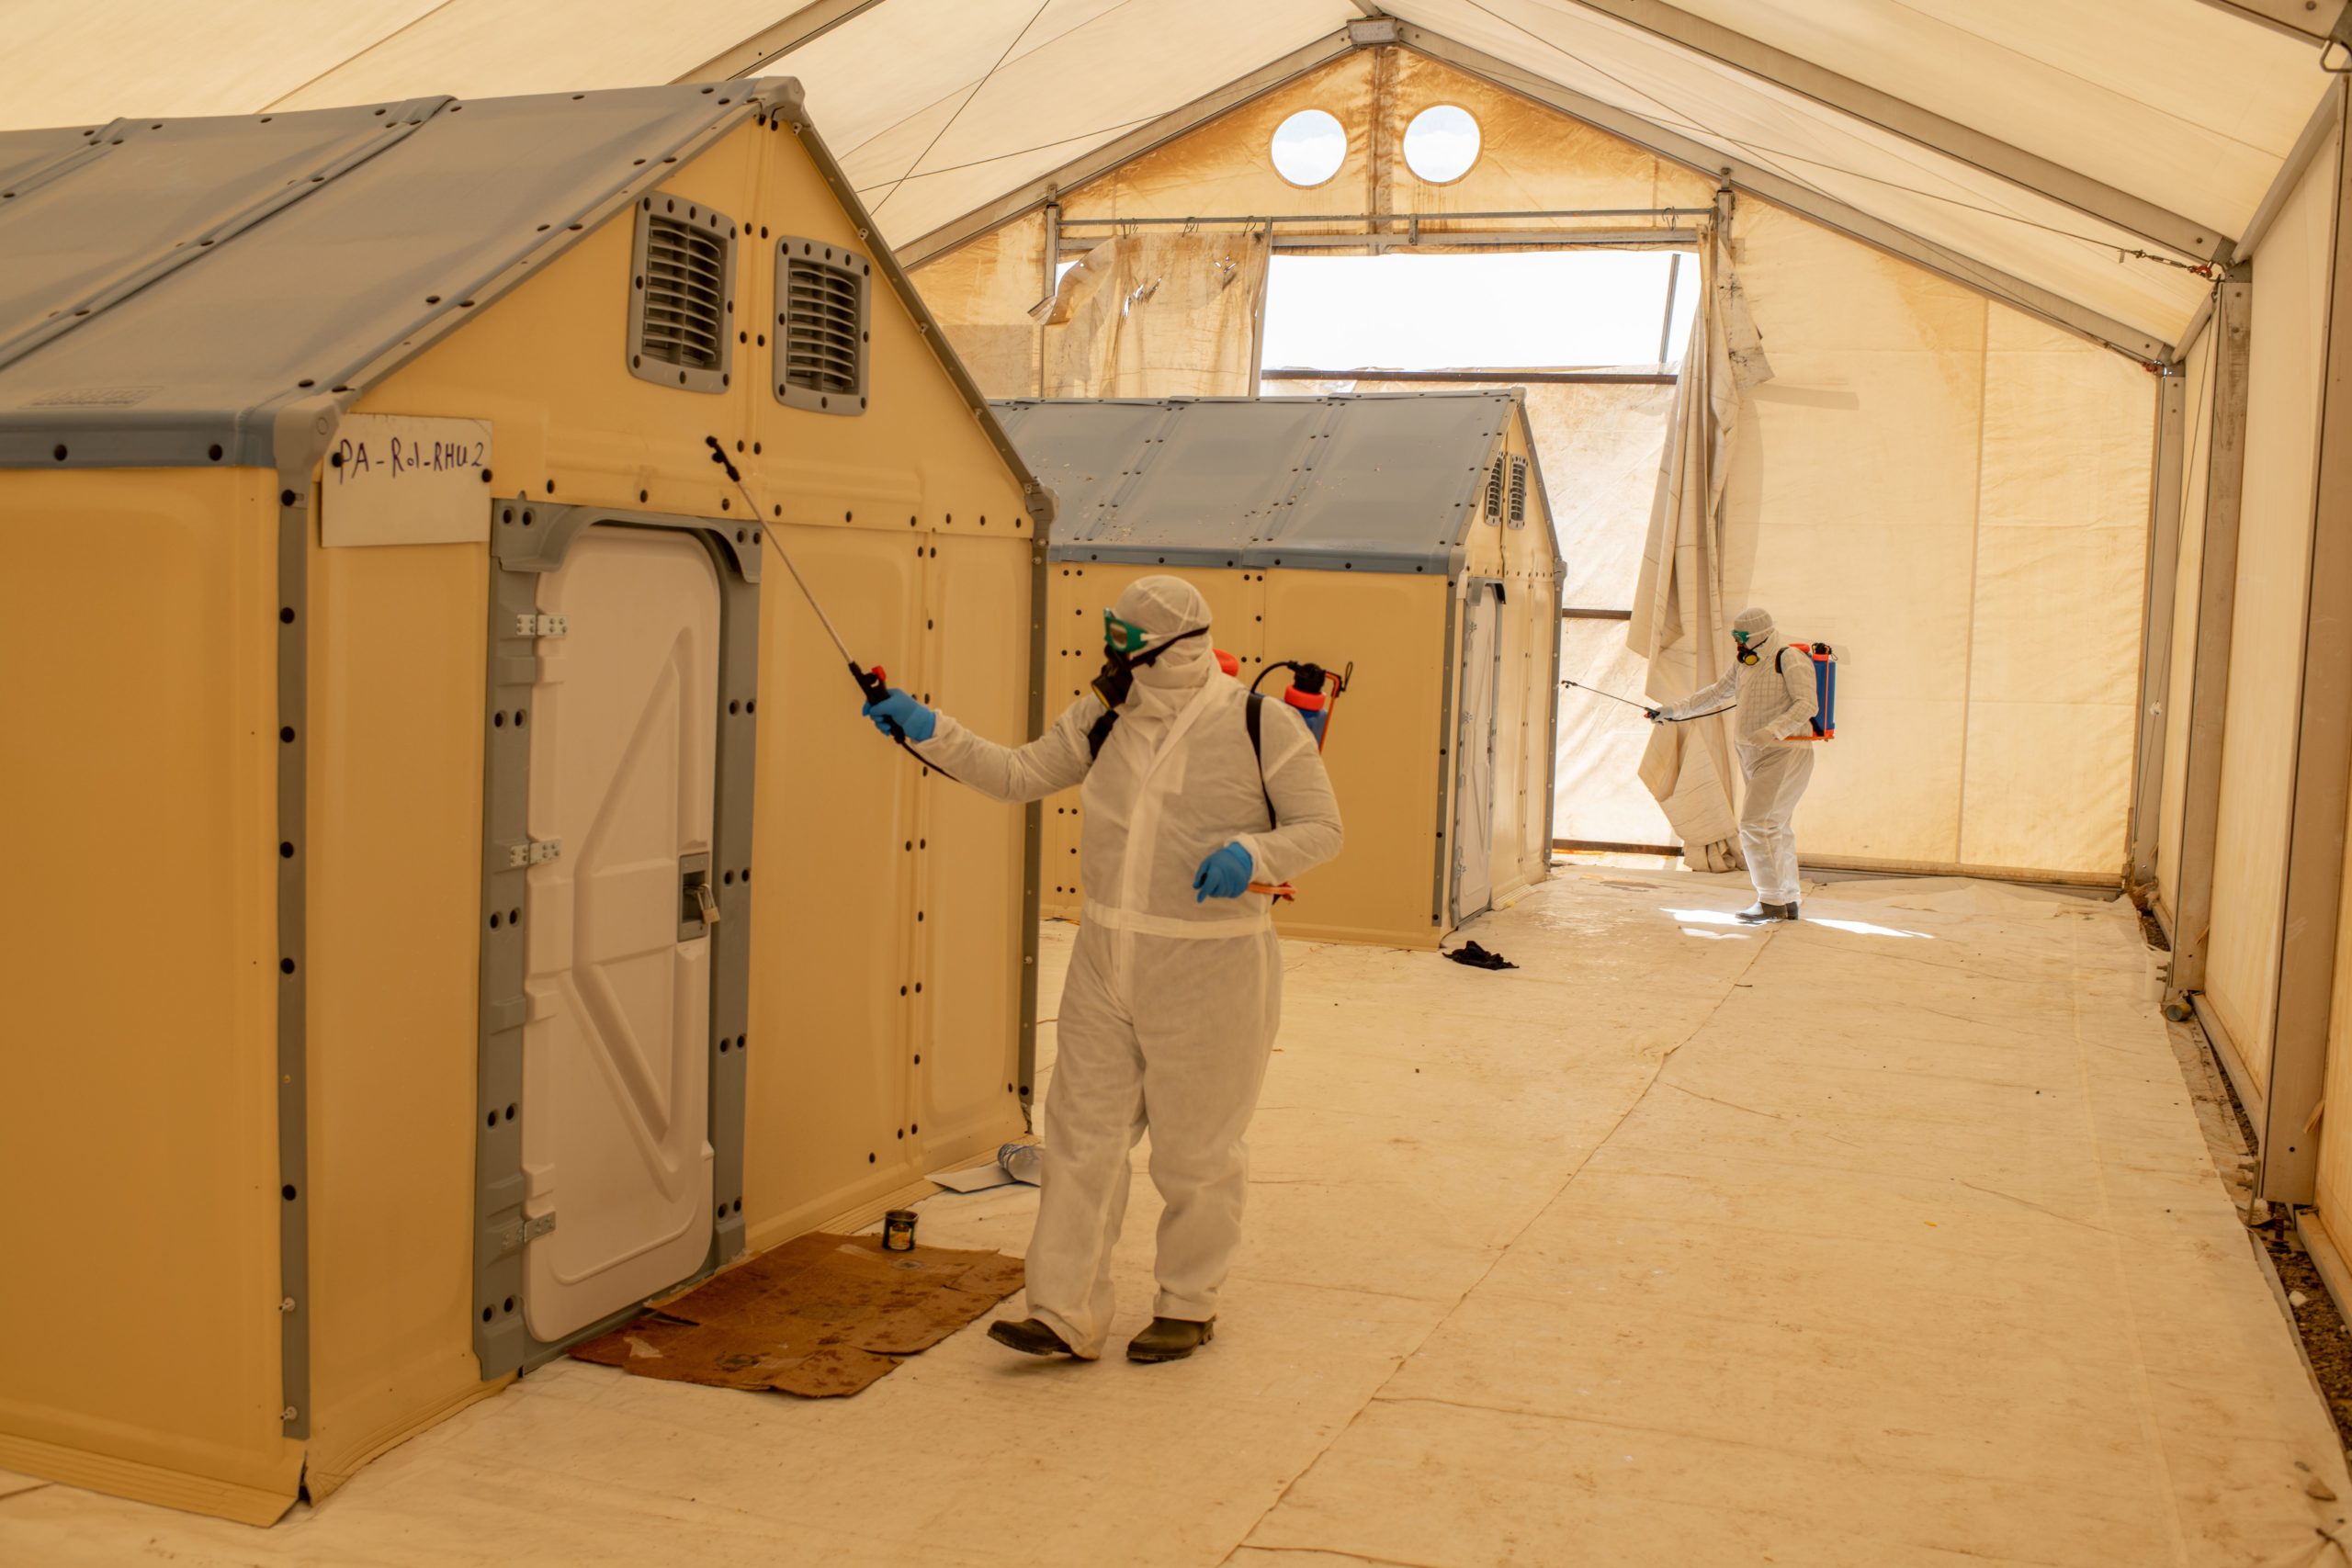 RHUs acting as quarantine shelters to prevent the spread of COVID-19 in Jordan camp